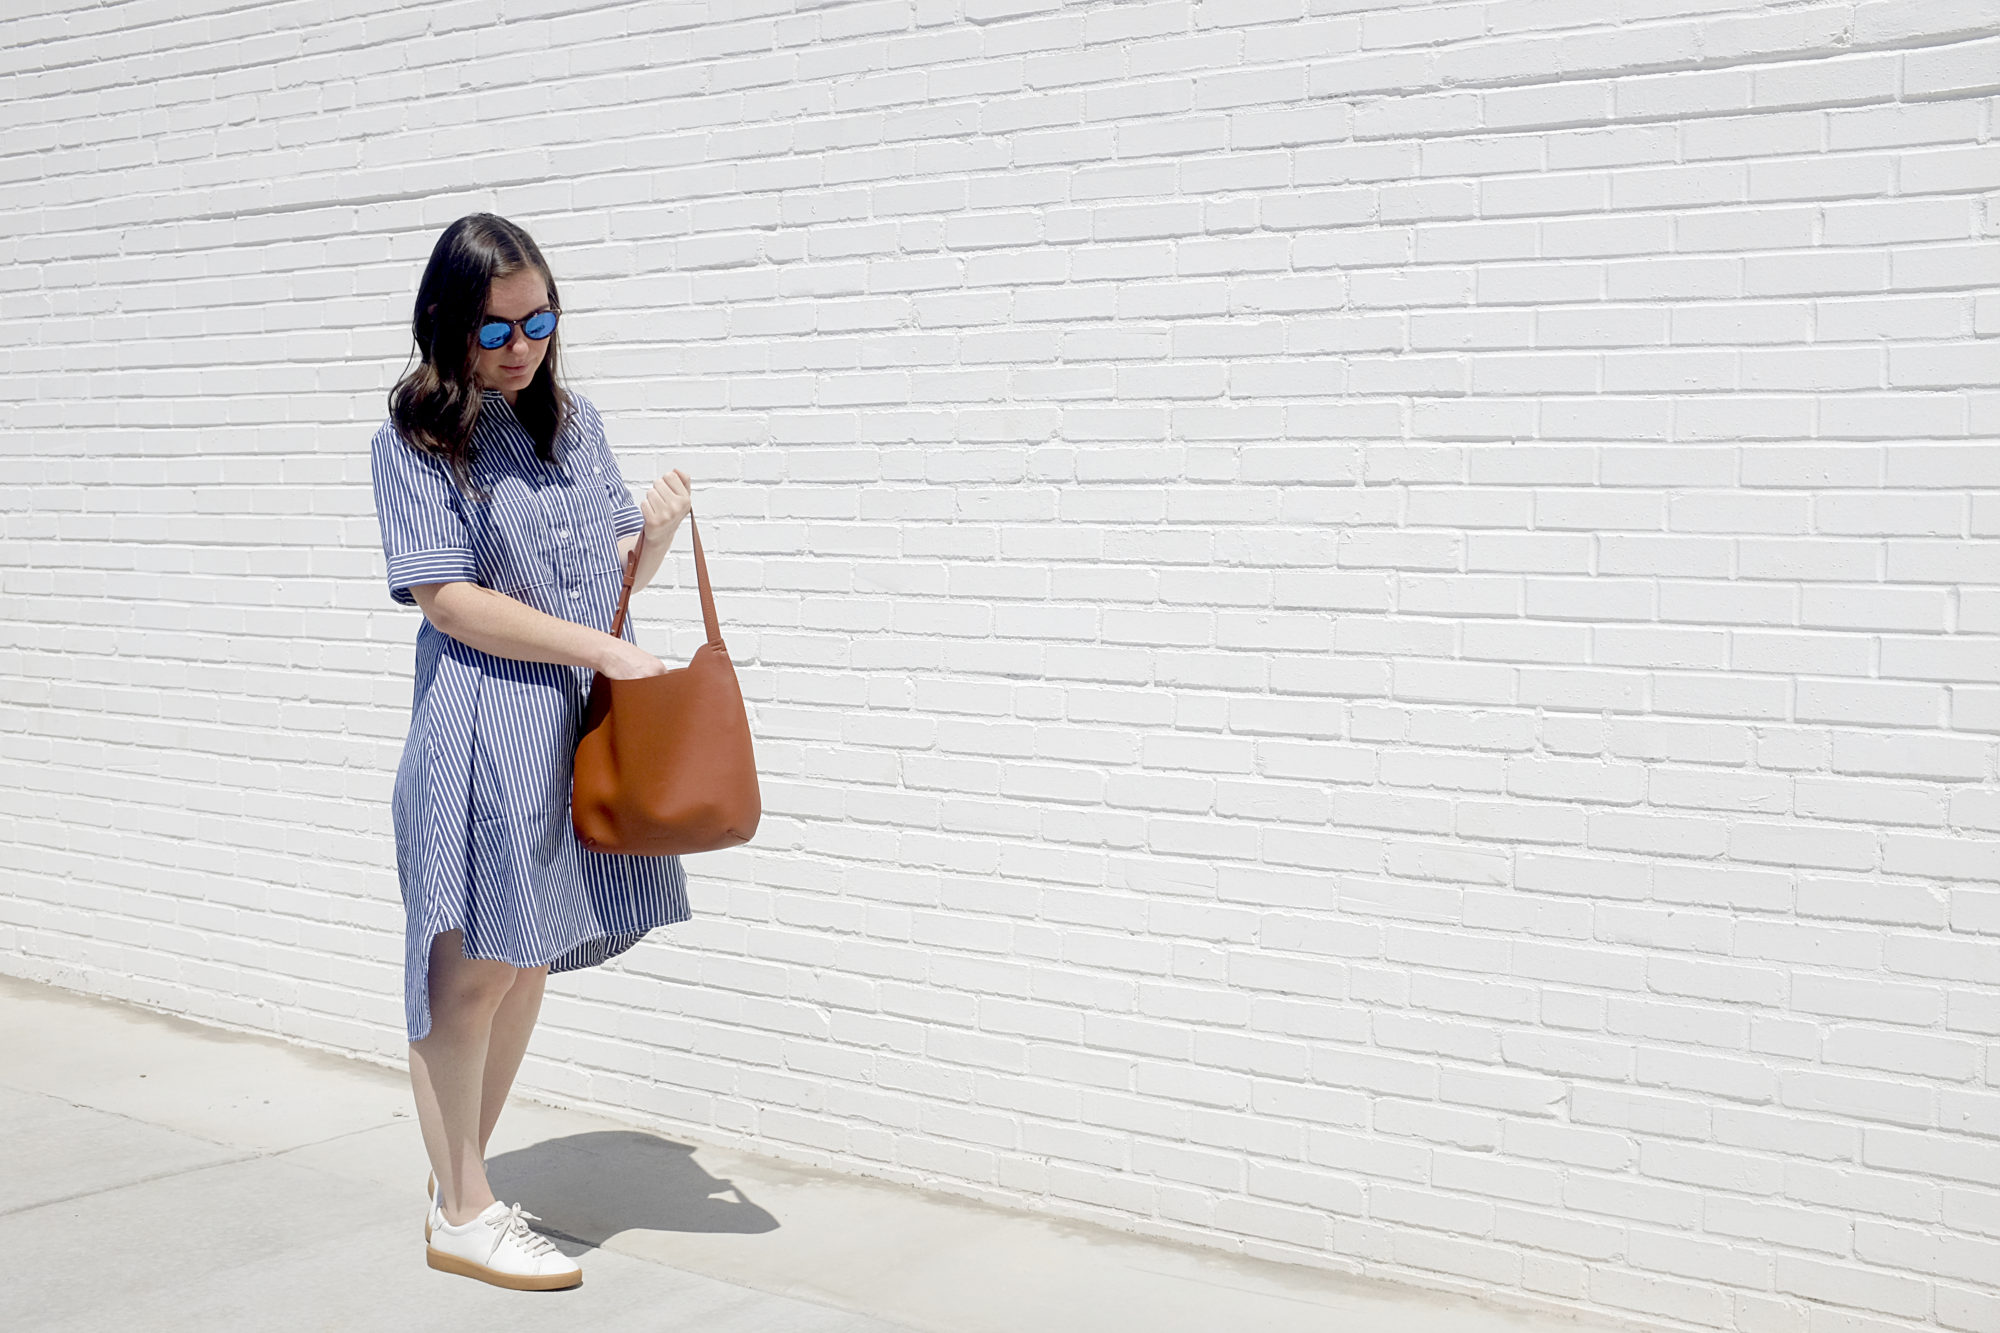 Alyssa wears a blue dress and carries the Everlane Cactus Leather Hobo